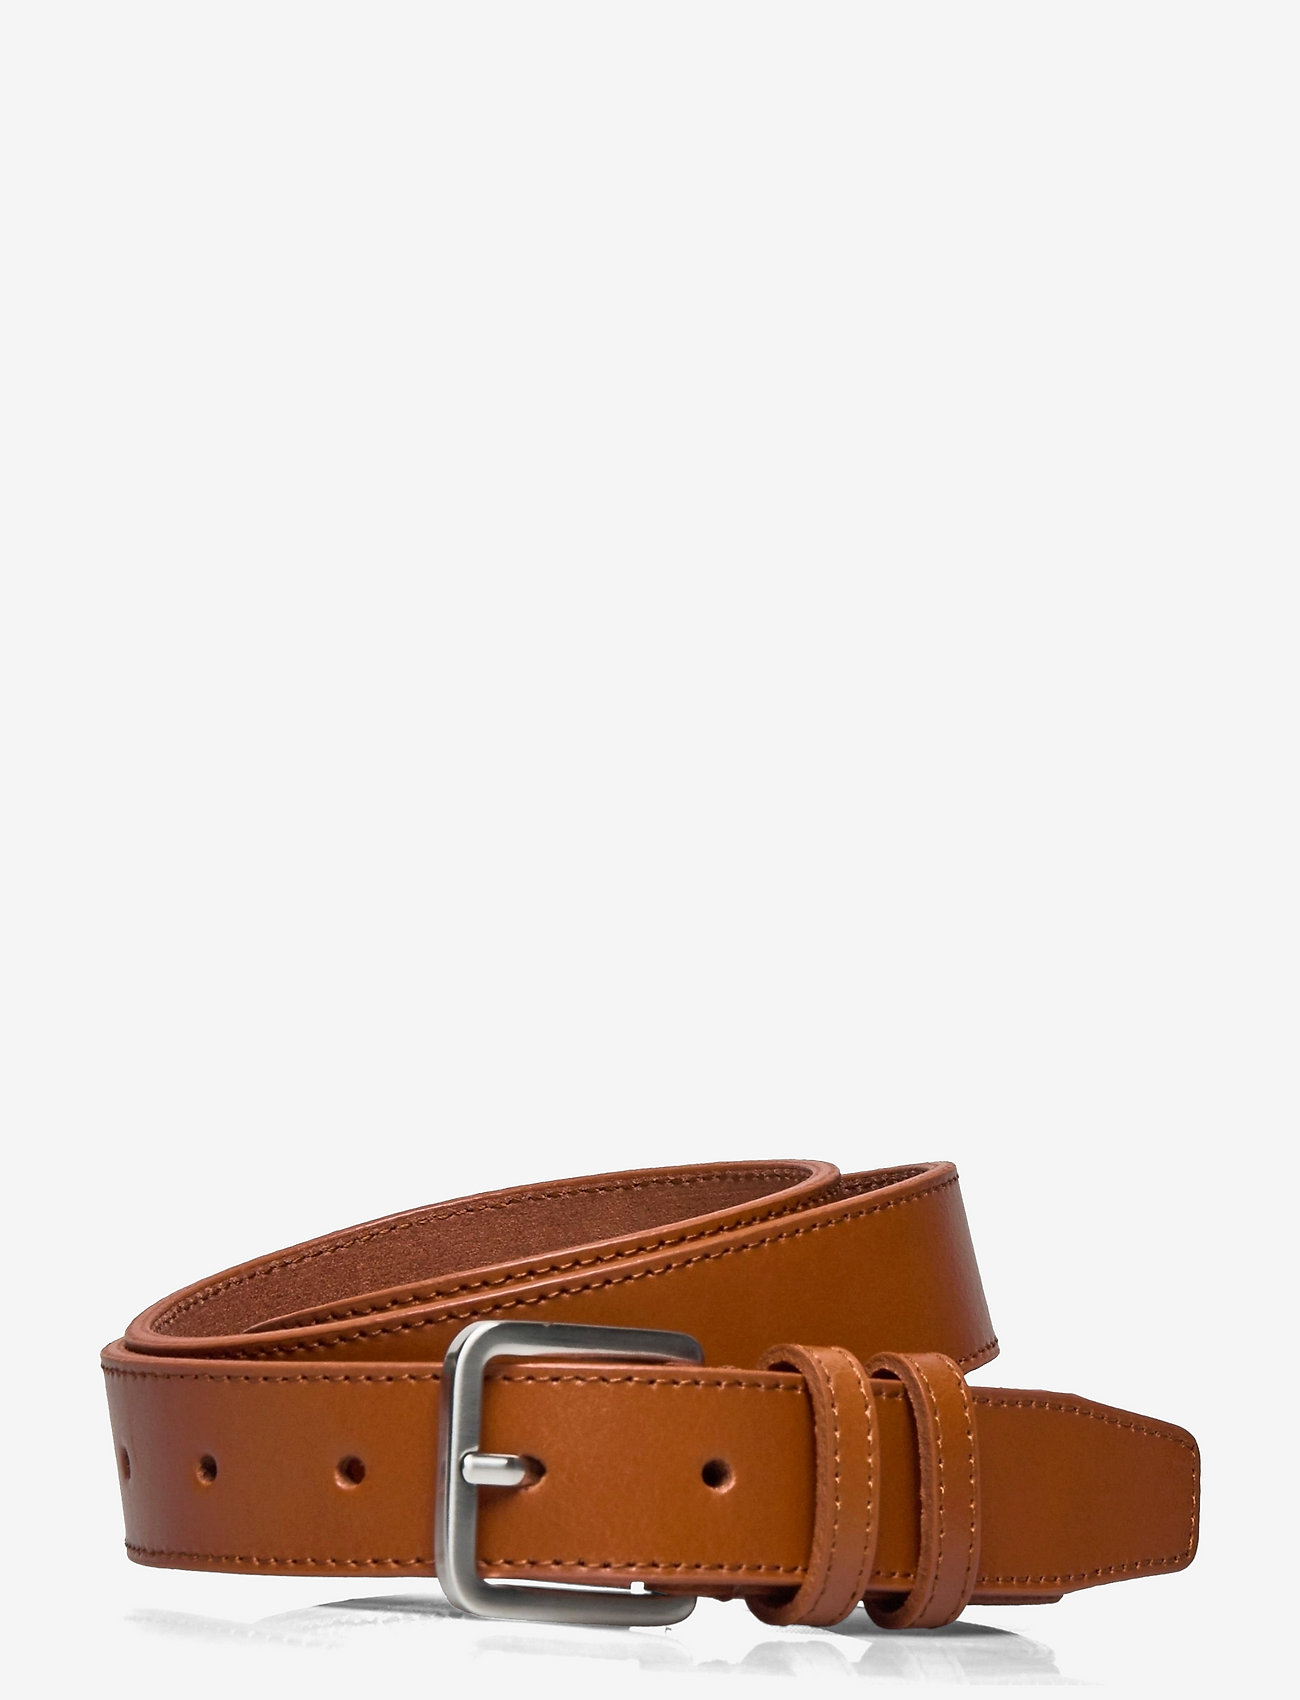 Selected Homme - SLHNATE LEATHER BELT NOOS - birthday gifts - cognac - 0